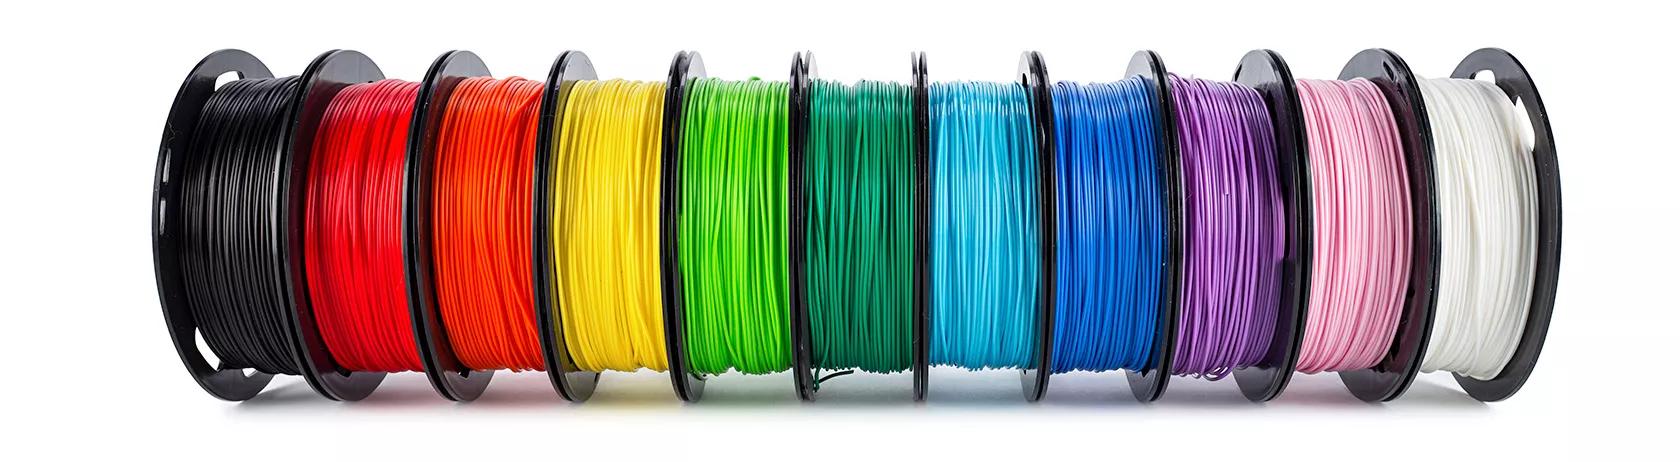 Spool of different colors of 3D printing filament 